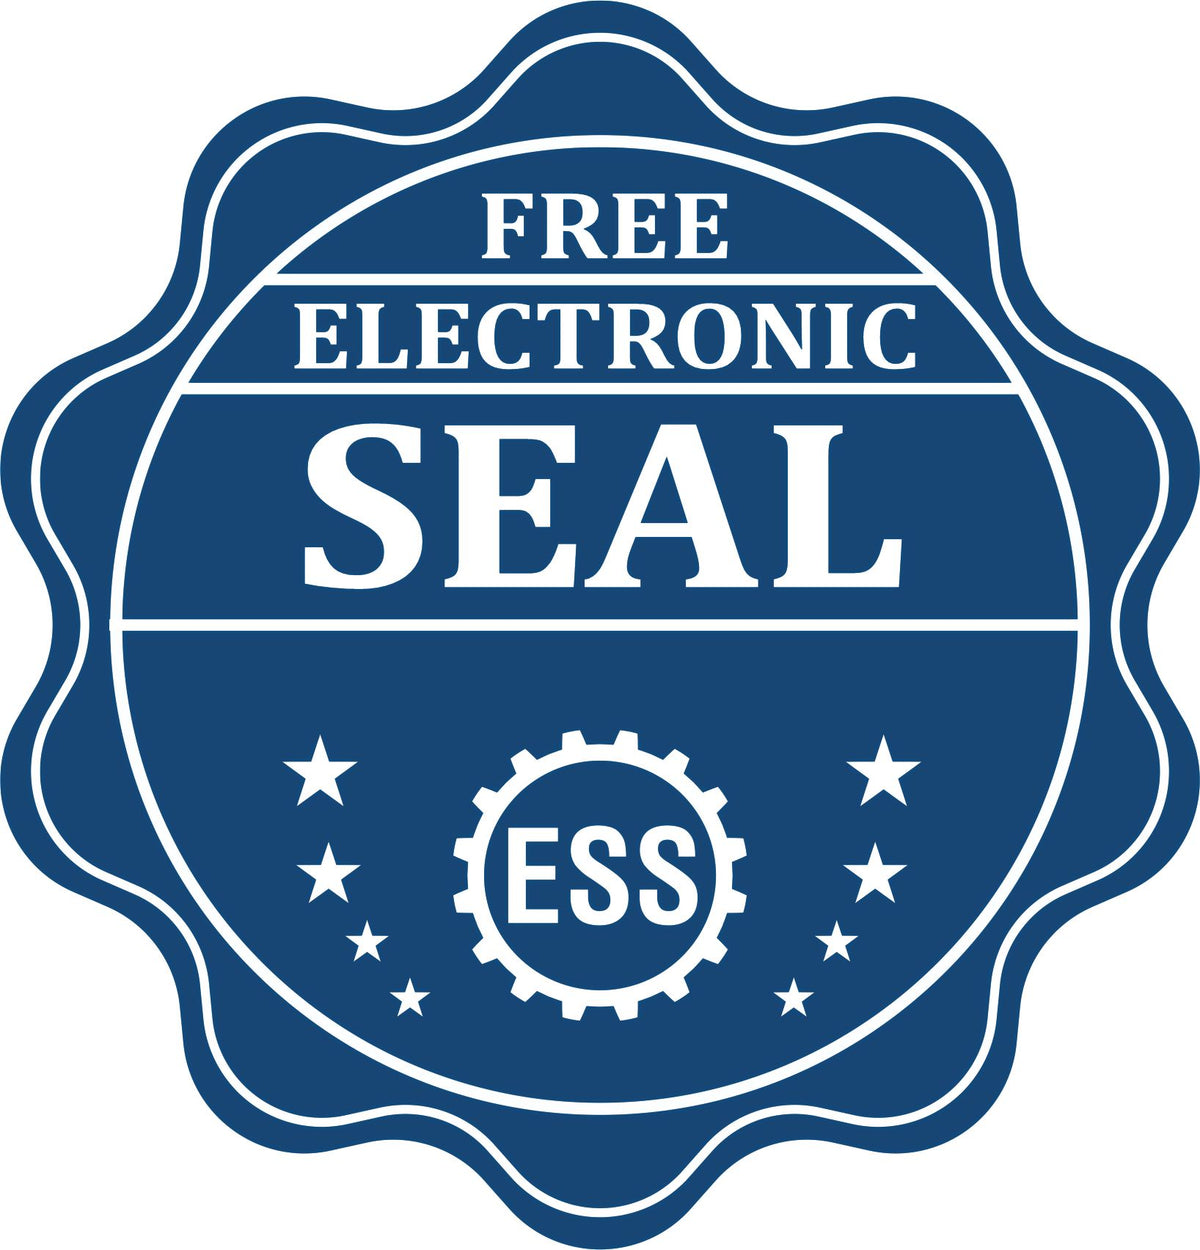 A badge showing a free electronic seal for the Hybrid Tennessee Engineer Seal with stars and the ESS gear on the emblem.